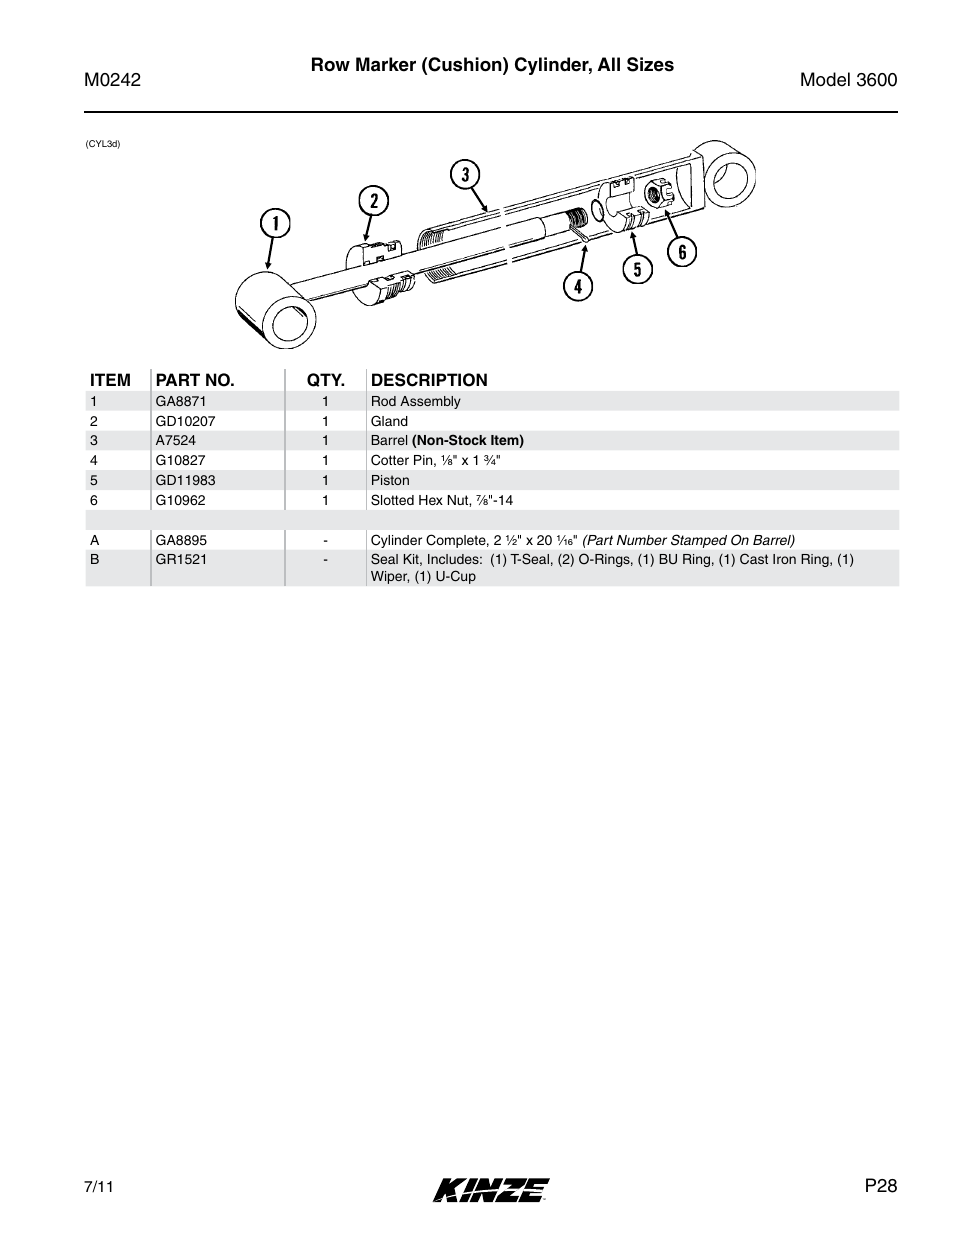 Row marker (cushion) cylinder, all sizes | Kinze 3600 Lift and Rotate Planter Rev. 6/14 User Manual | Page 31 / 40